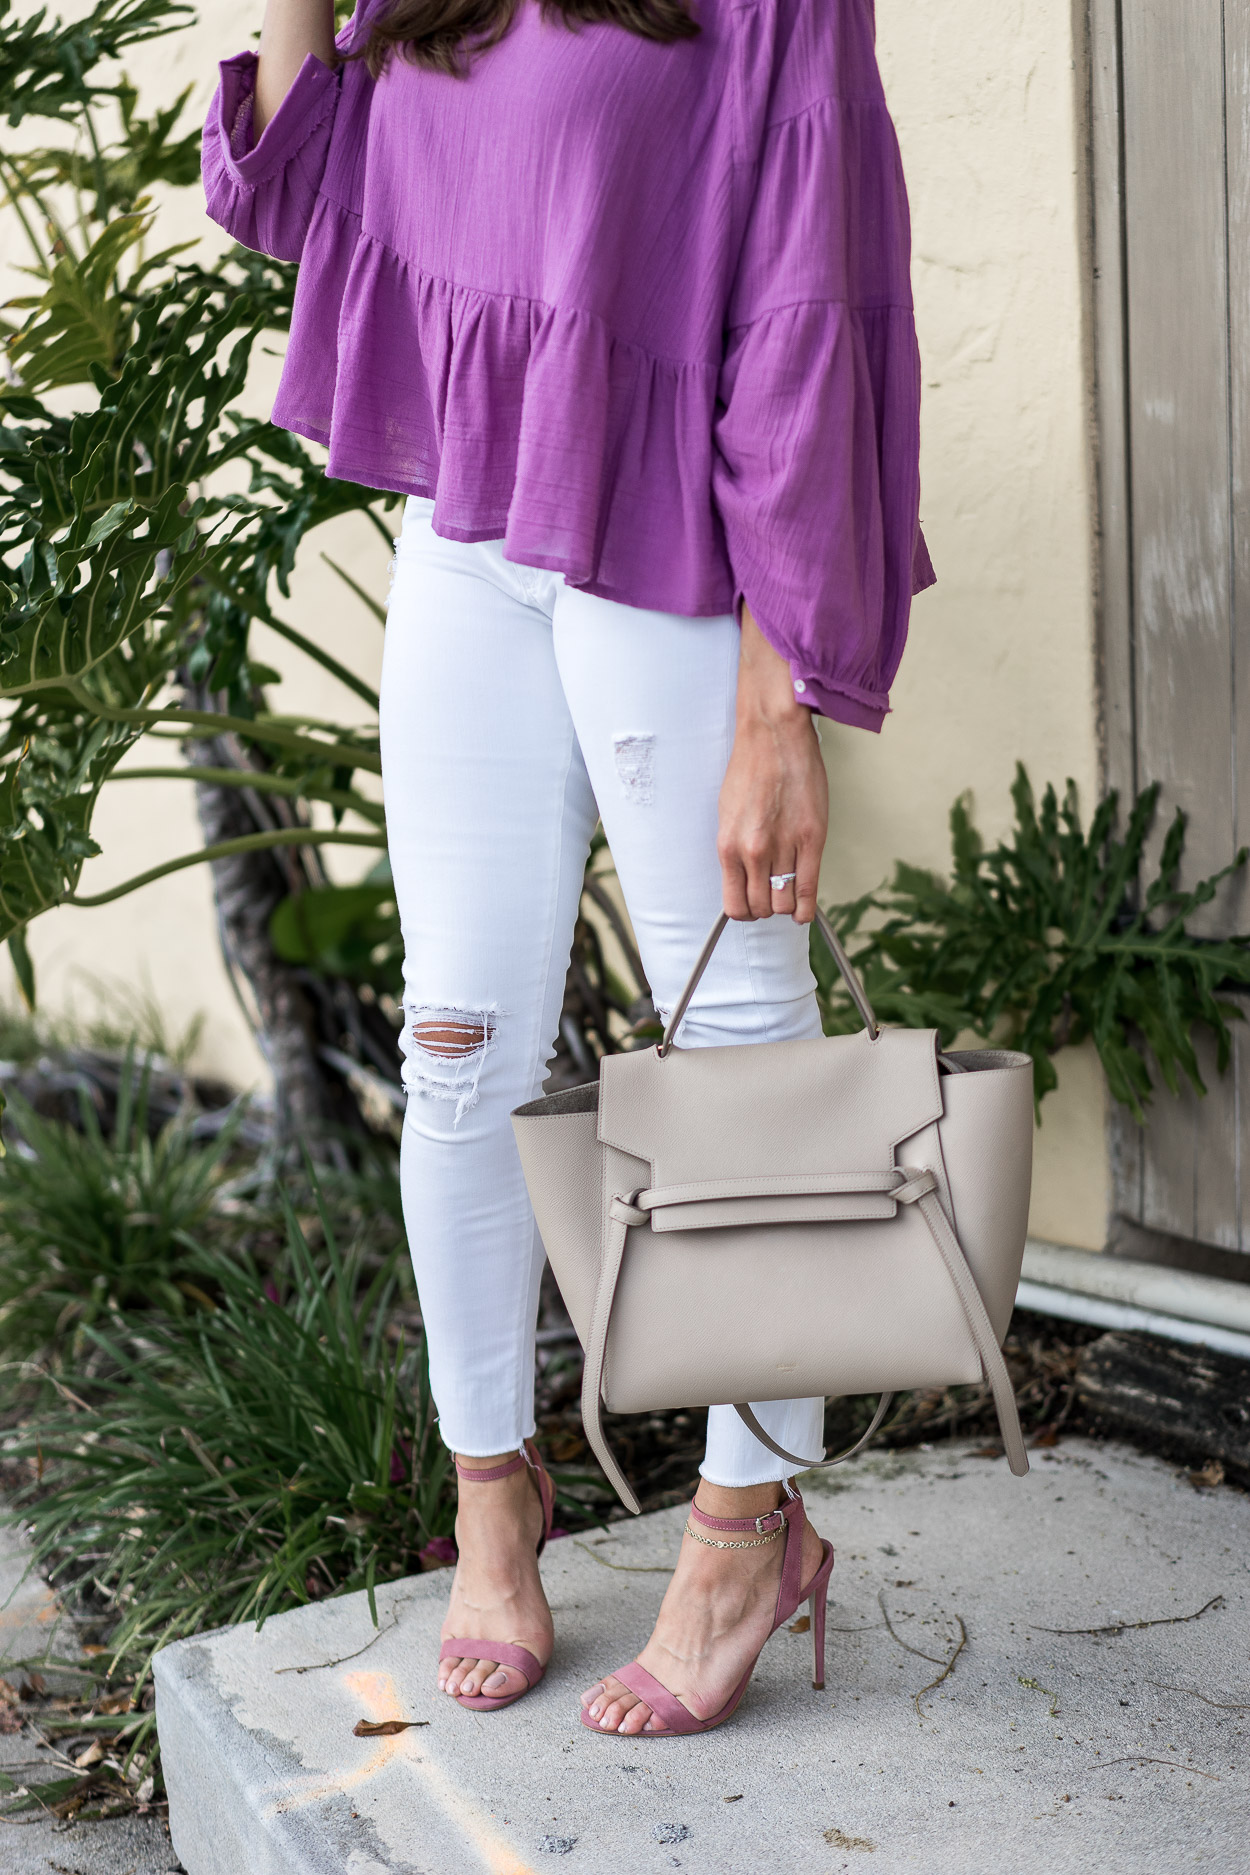 Perfect addition to a Summer must have boho top by Free People? White distressed denim and Celine belt bag styled by AGlamlifestyle blogger Amanda.